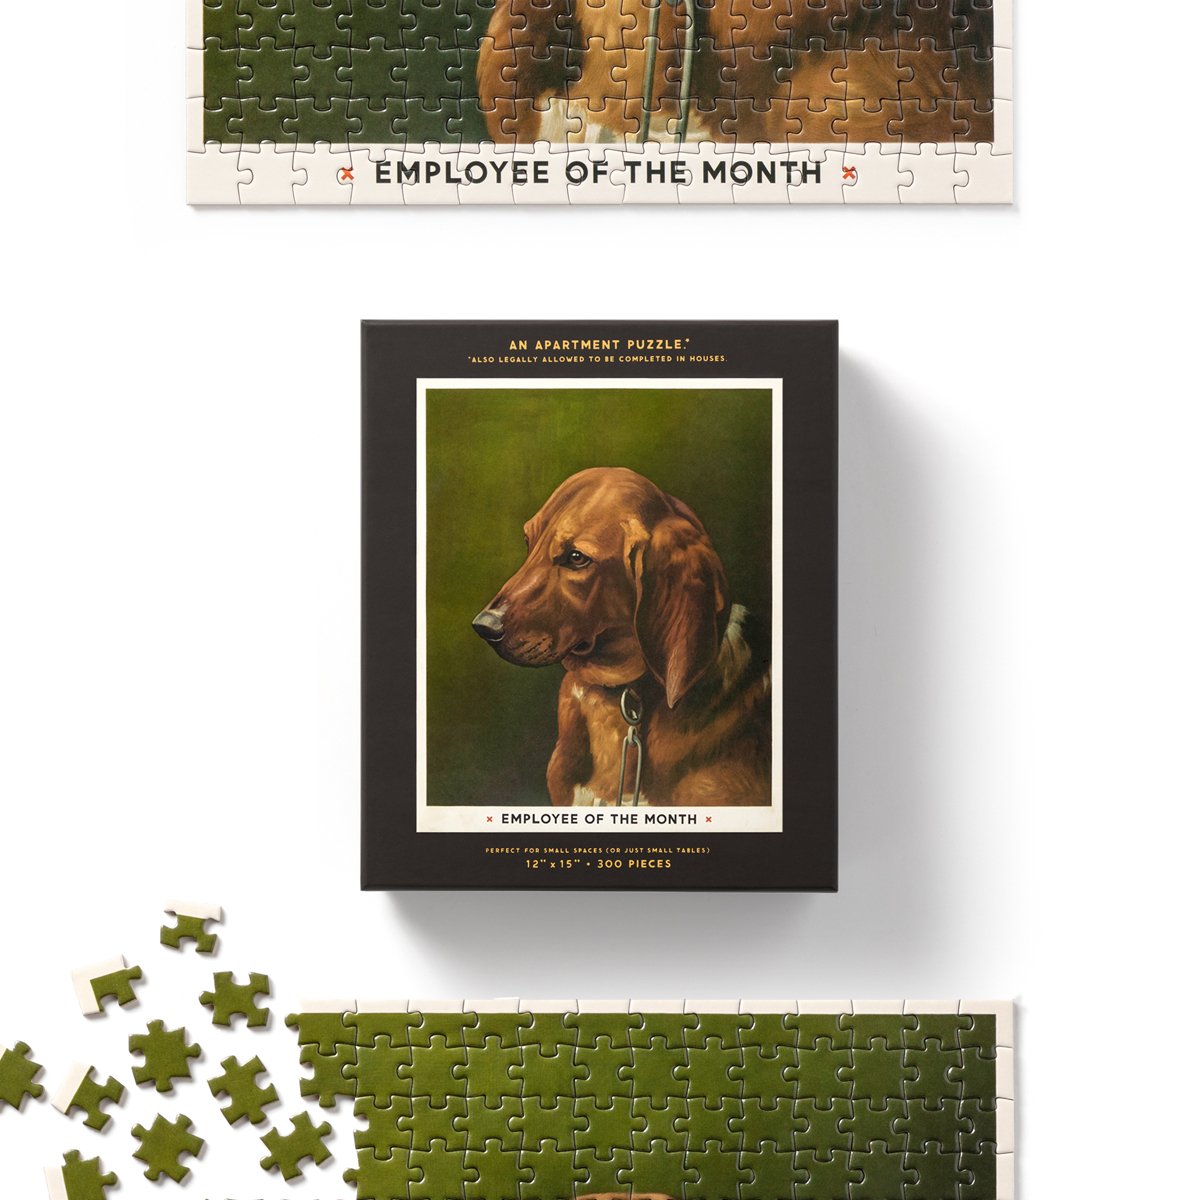 Employee Of The Month 300 Piece Apartment Puzzle - Brass Monkey - 9780735368910